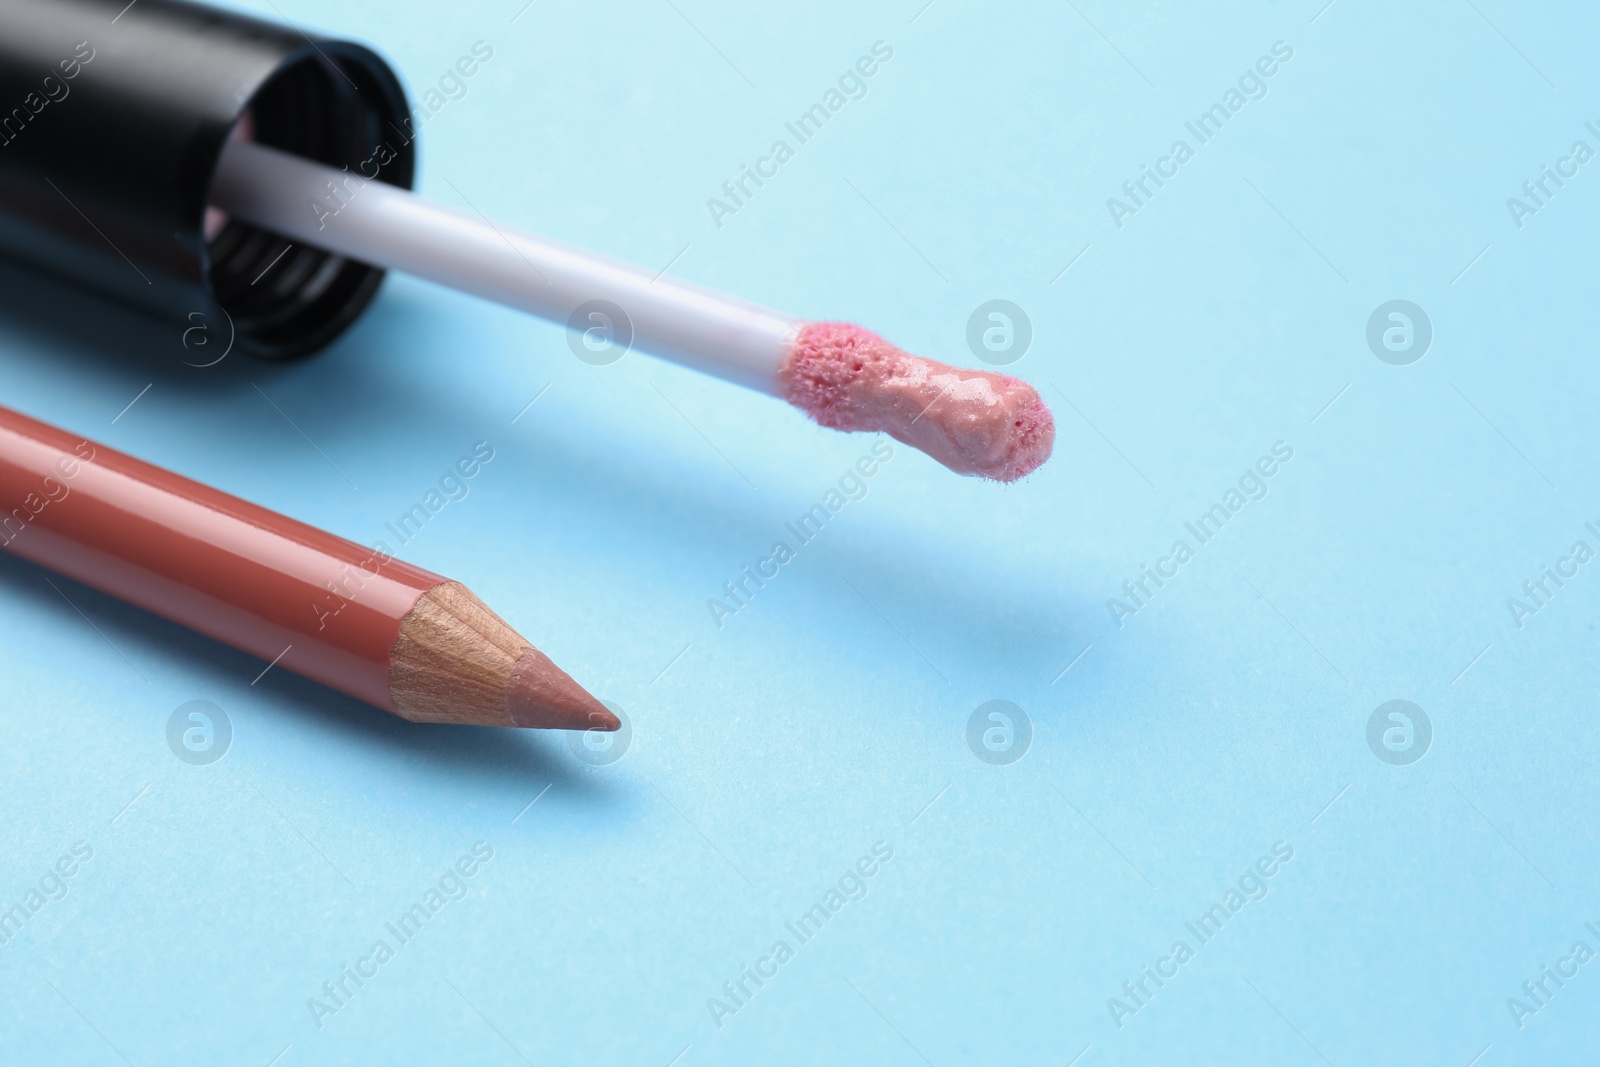 Photo of Lip pencil and brush of liquid lipstick on light blue background, closeup view with space for text. Cosmetic product